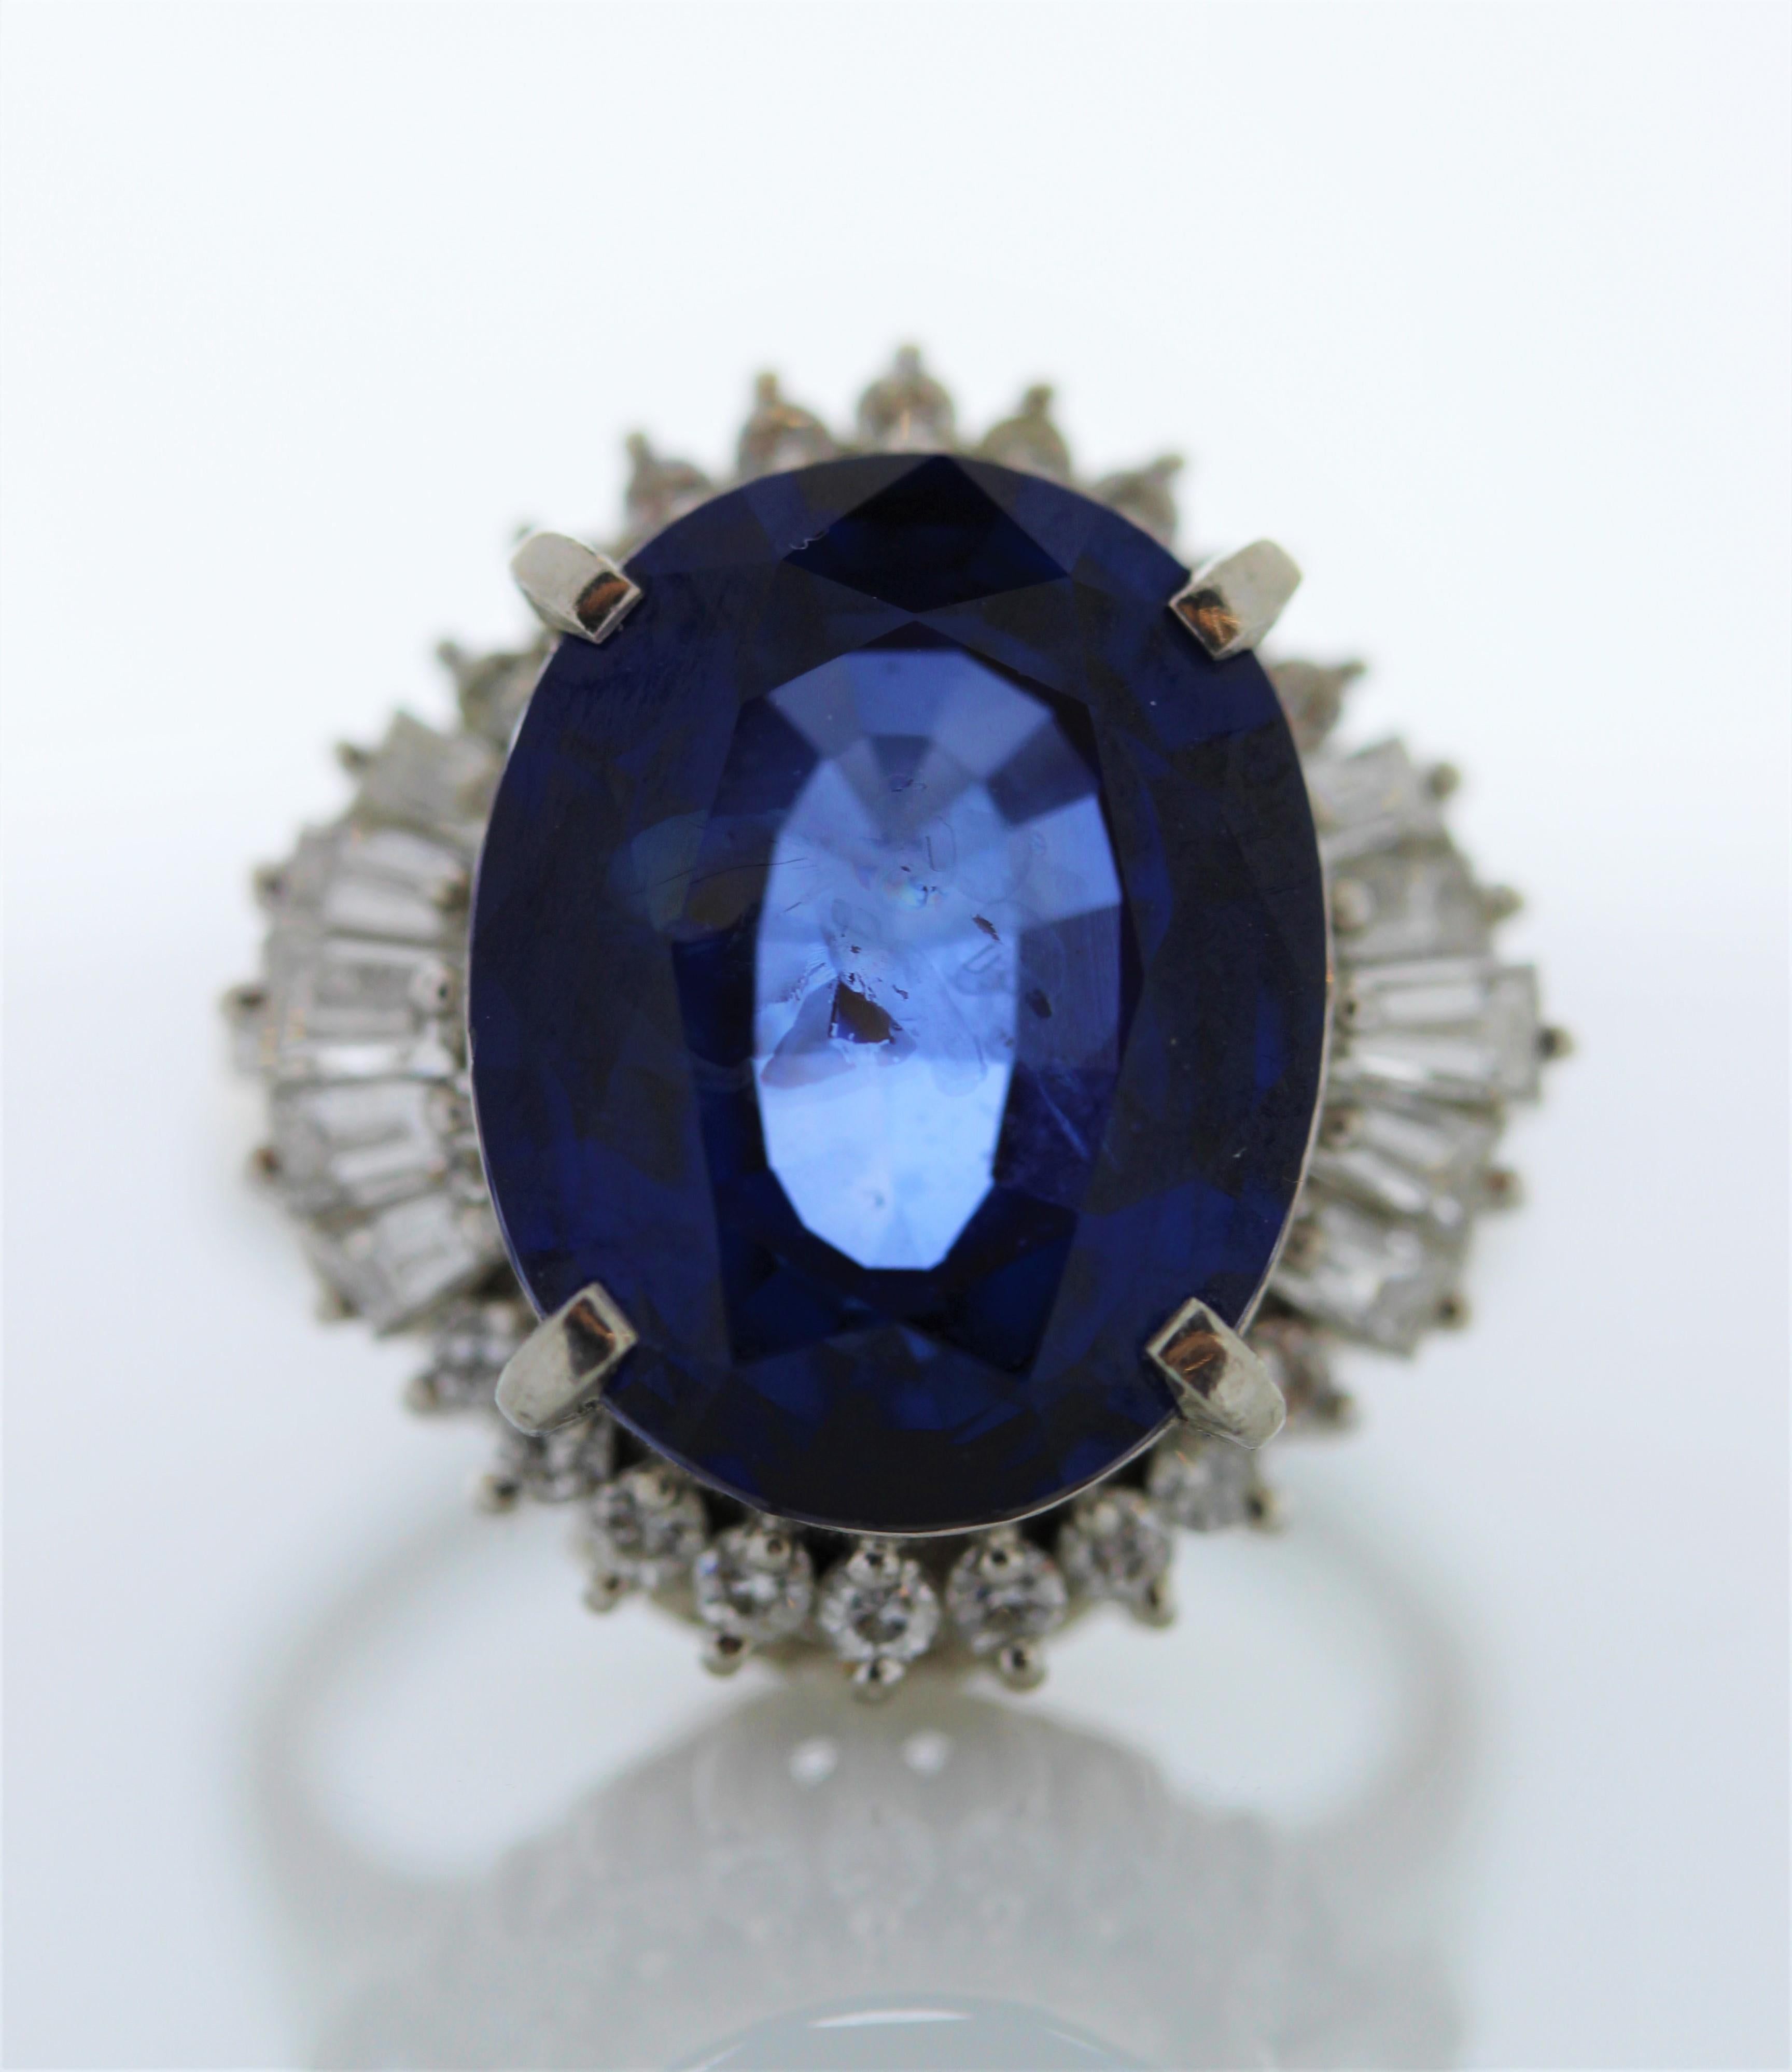 A ring fit for a queen! Your eye will be drawn magnetically to the 11.24 carats royal blue sapphire that is surrounded by a dazzling halo of round brilliant diamonds. The sapphire is from Sri Lanka. The color is royal blue; the luster & clarity are